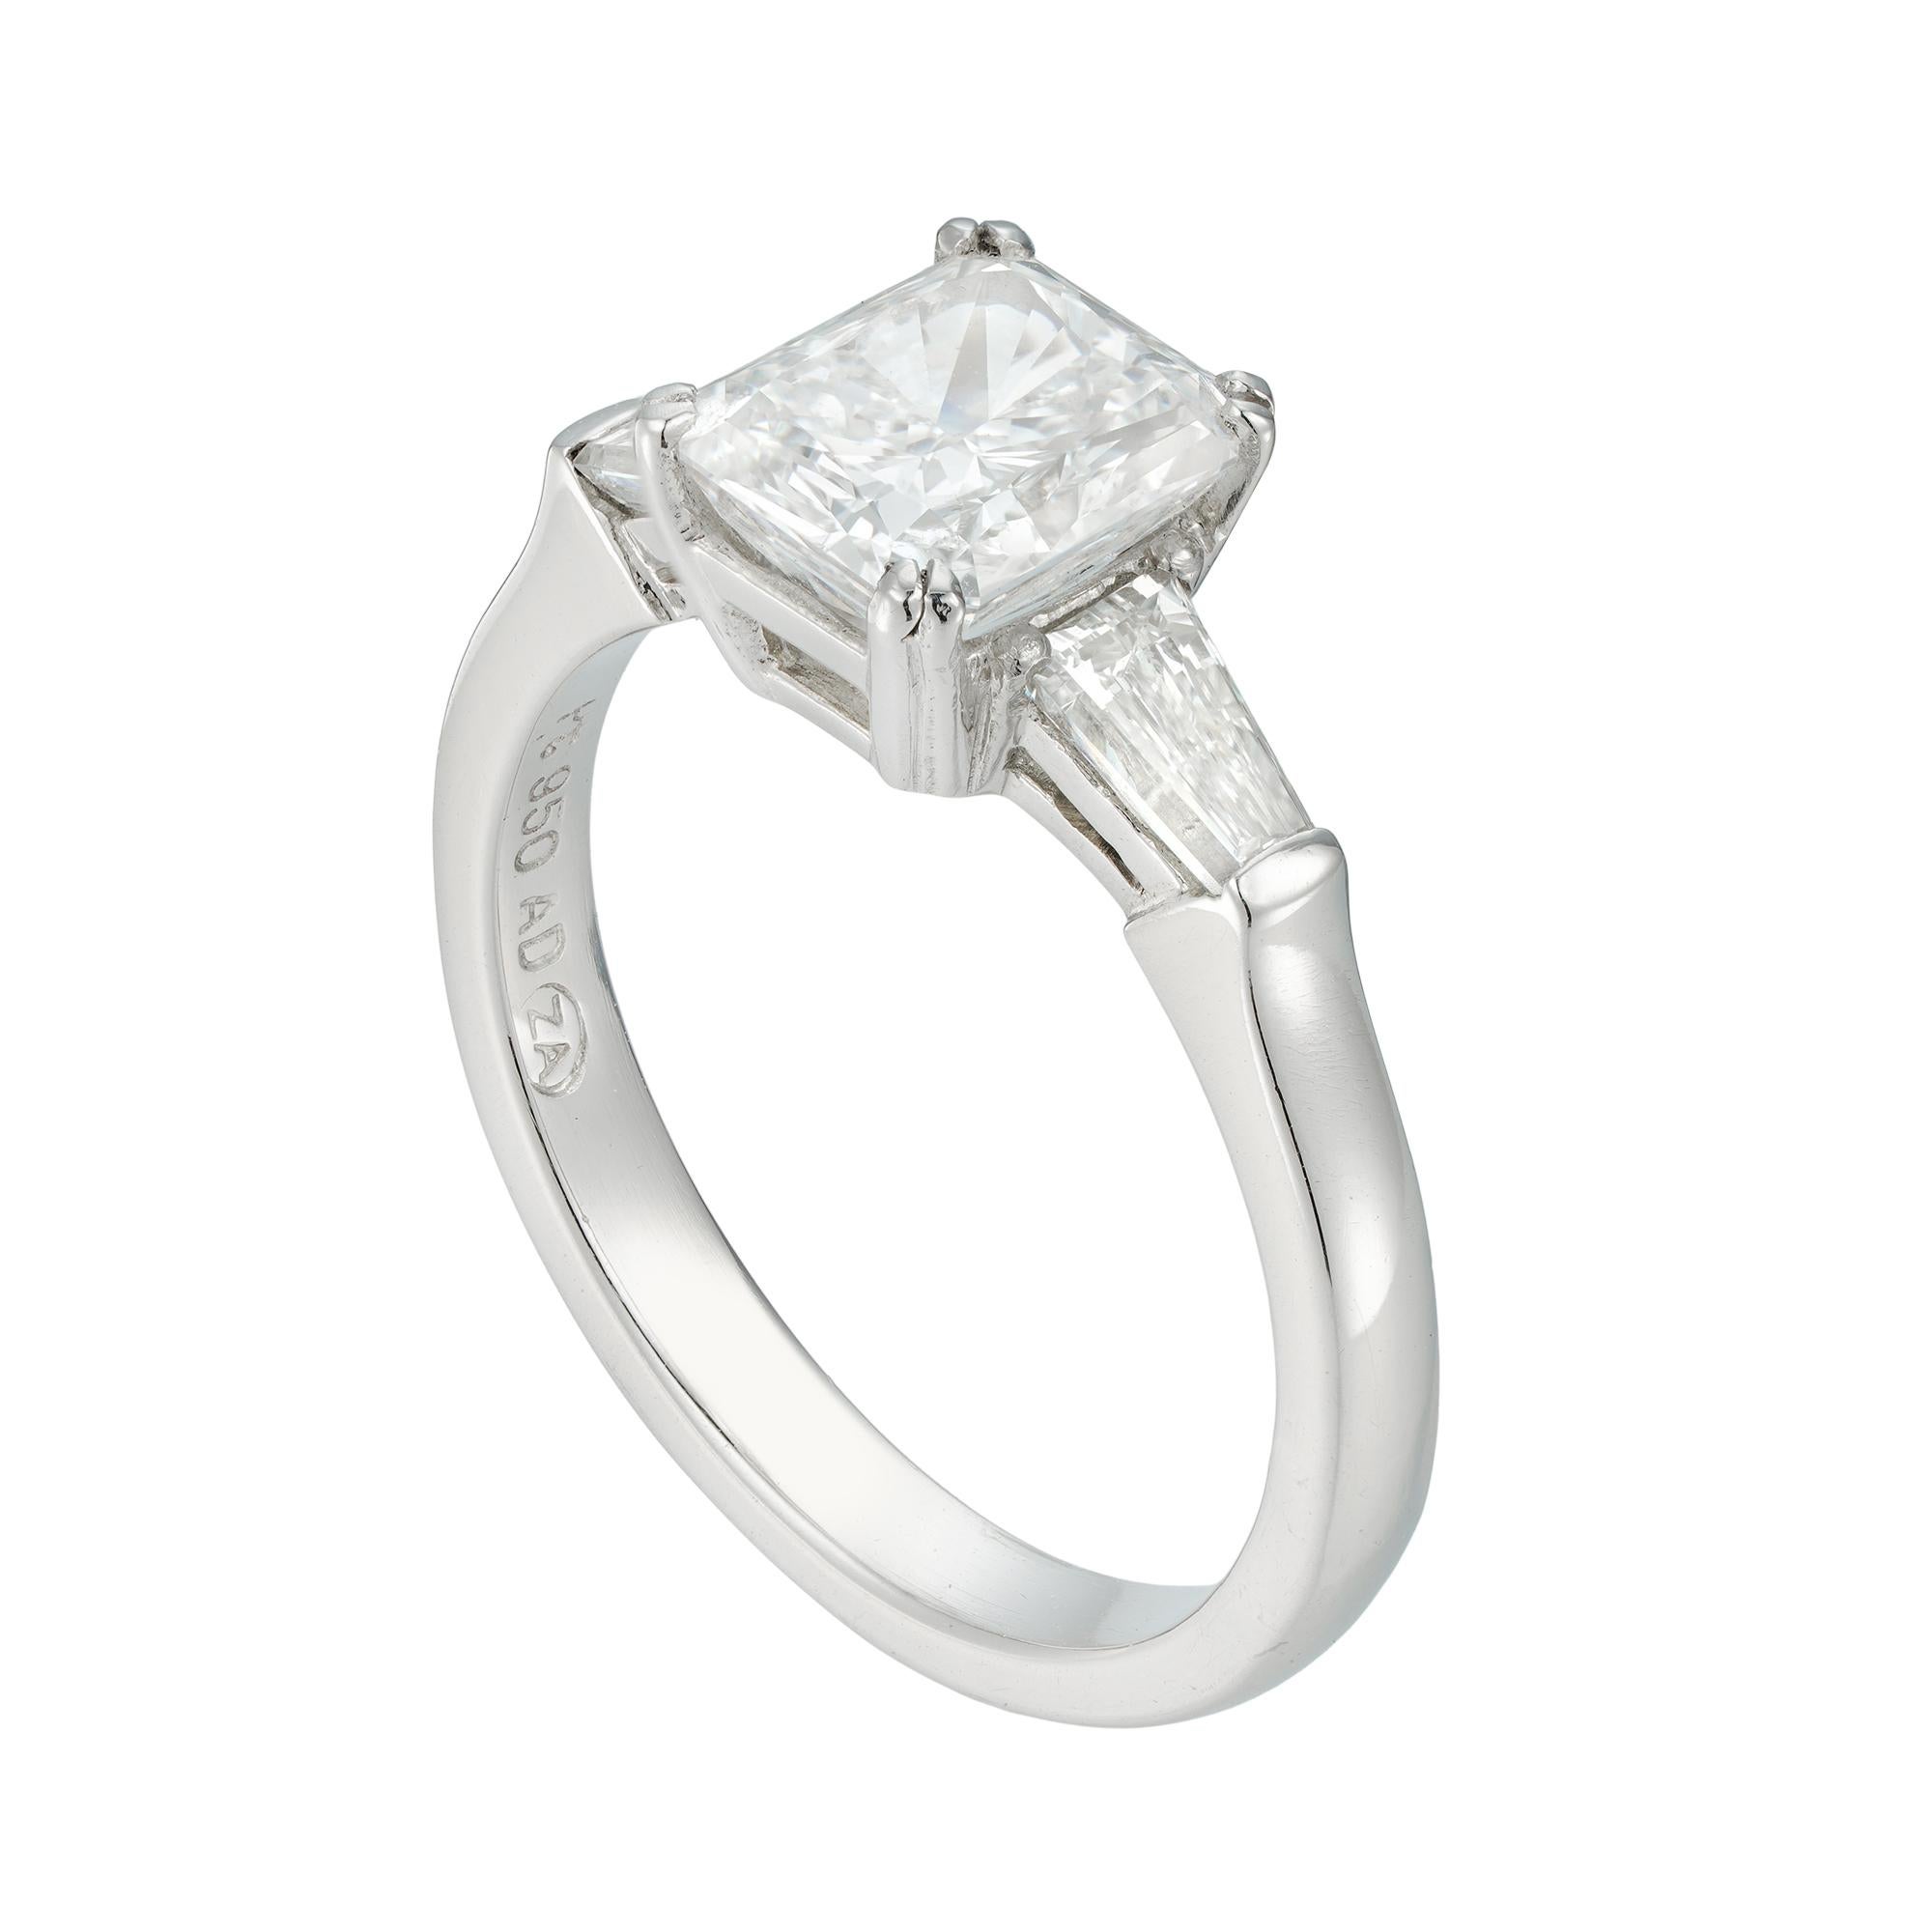 A rectangular brilliant-cut diamond ring, the cut cornered rectangular modified brilliant-cut diamond, accompanied by GIA report stating to be of E colour and SI1 clarity, four double claw-set between two tapered baguette-cut diamonds estimated to